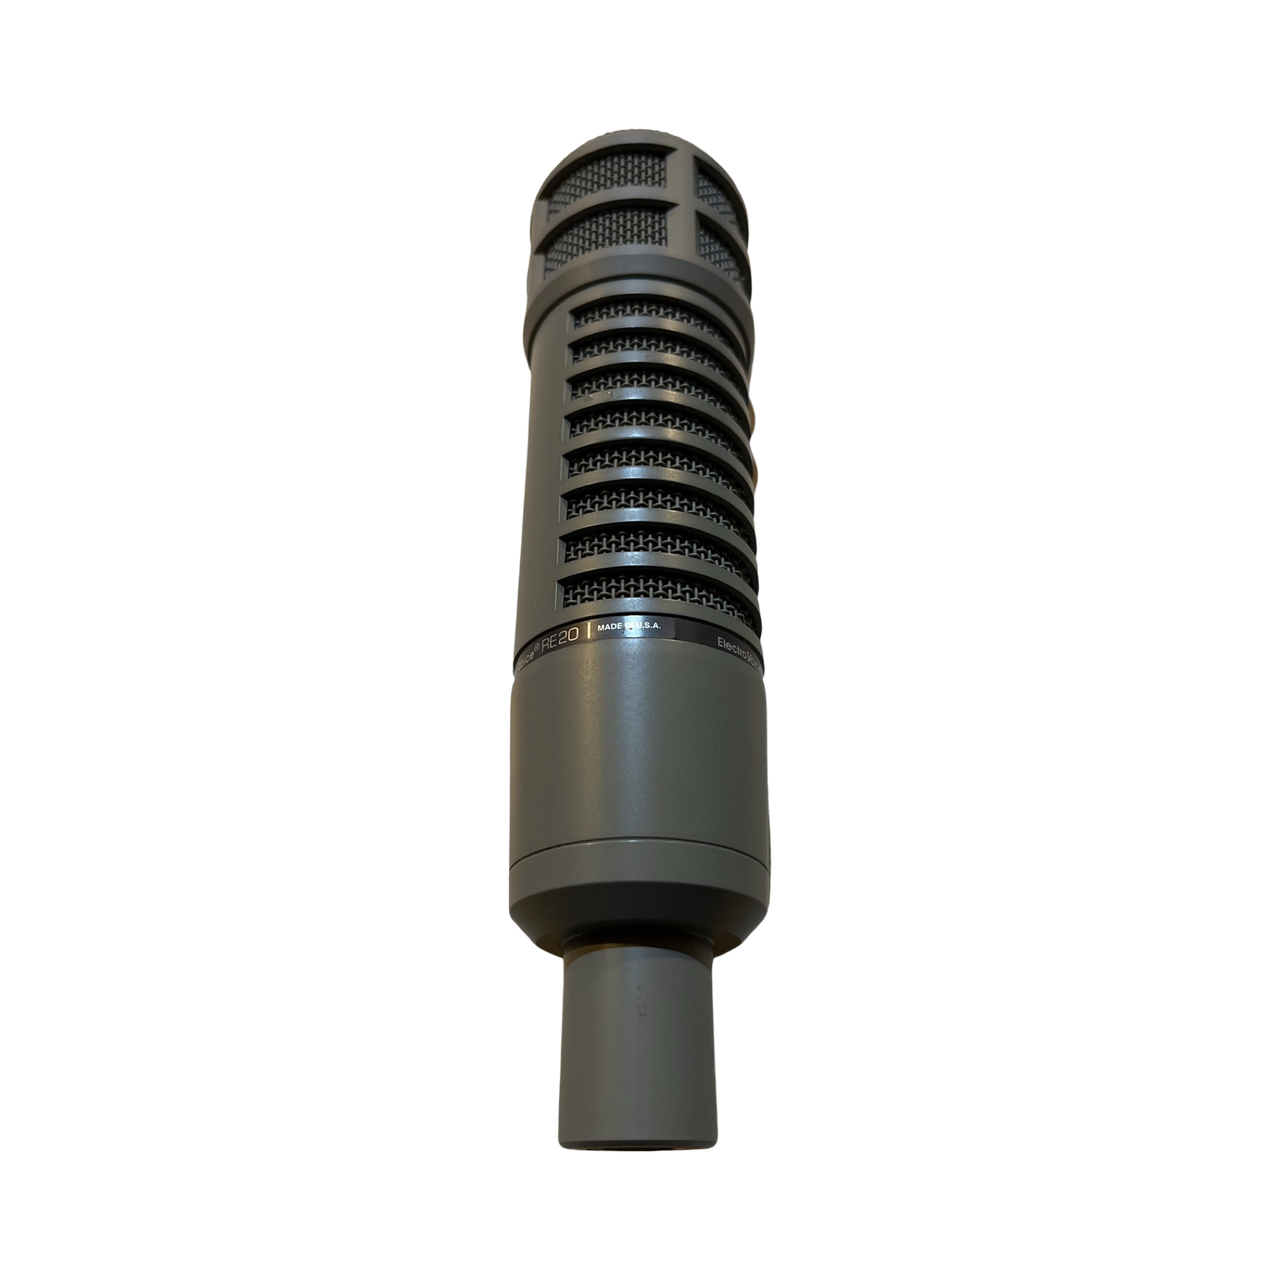 Electro Voive RE 20 Announcers Microphone